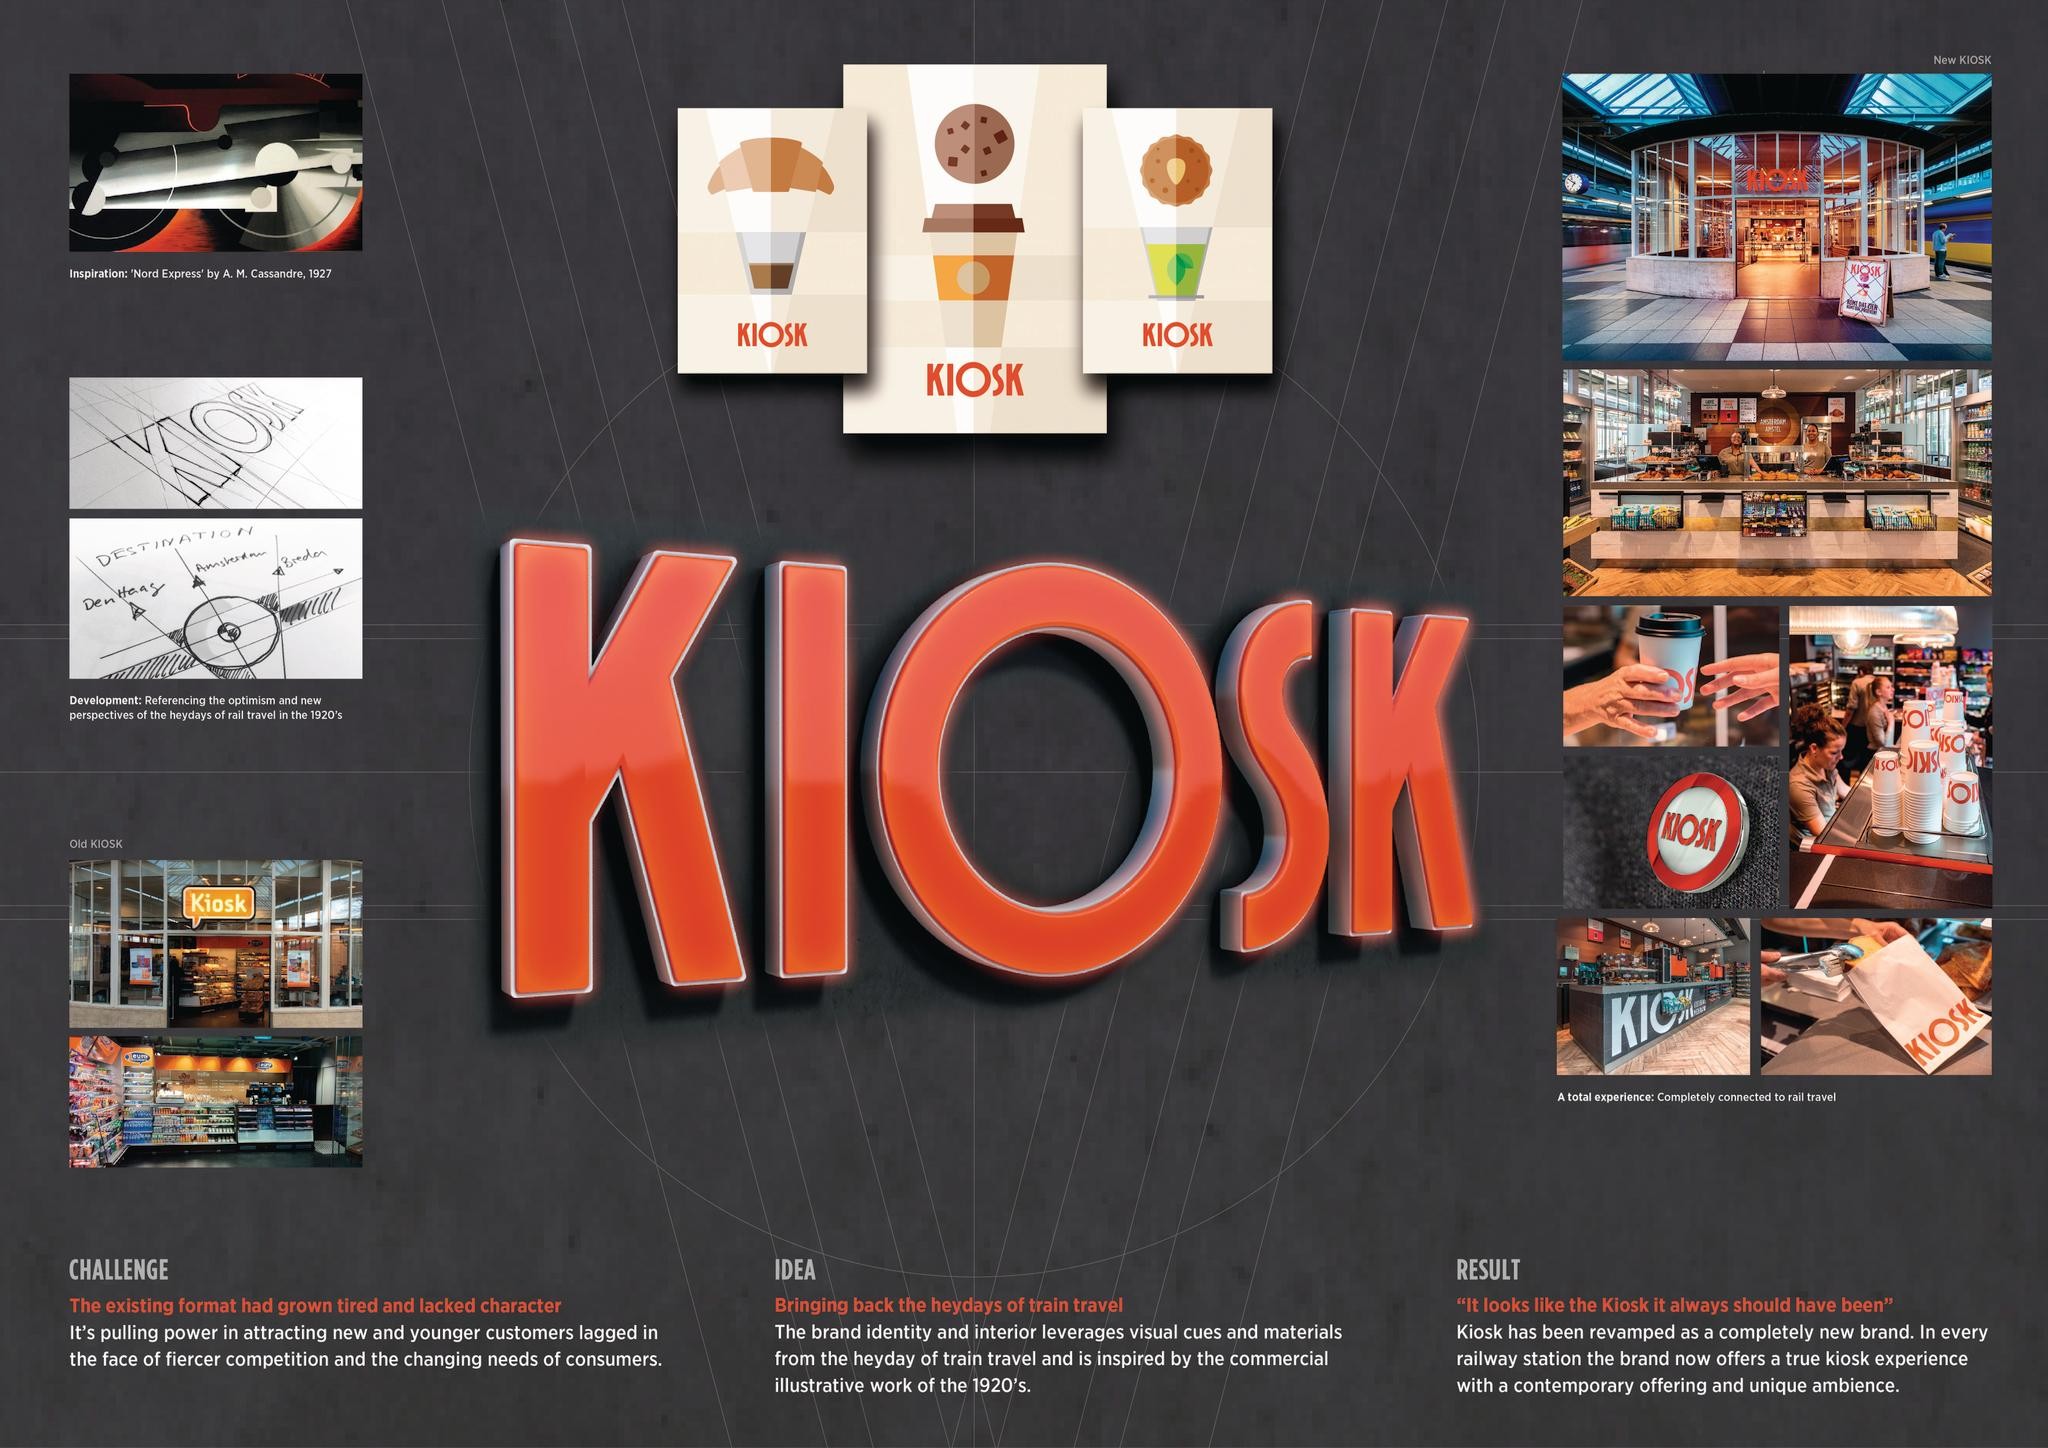 KIOSK - REFRESHING ITS ROOTS AT THE RAILWAY STATIONS